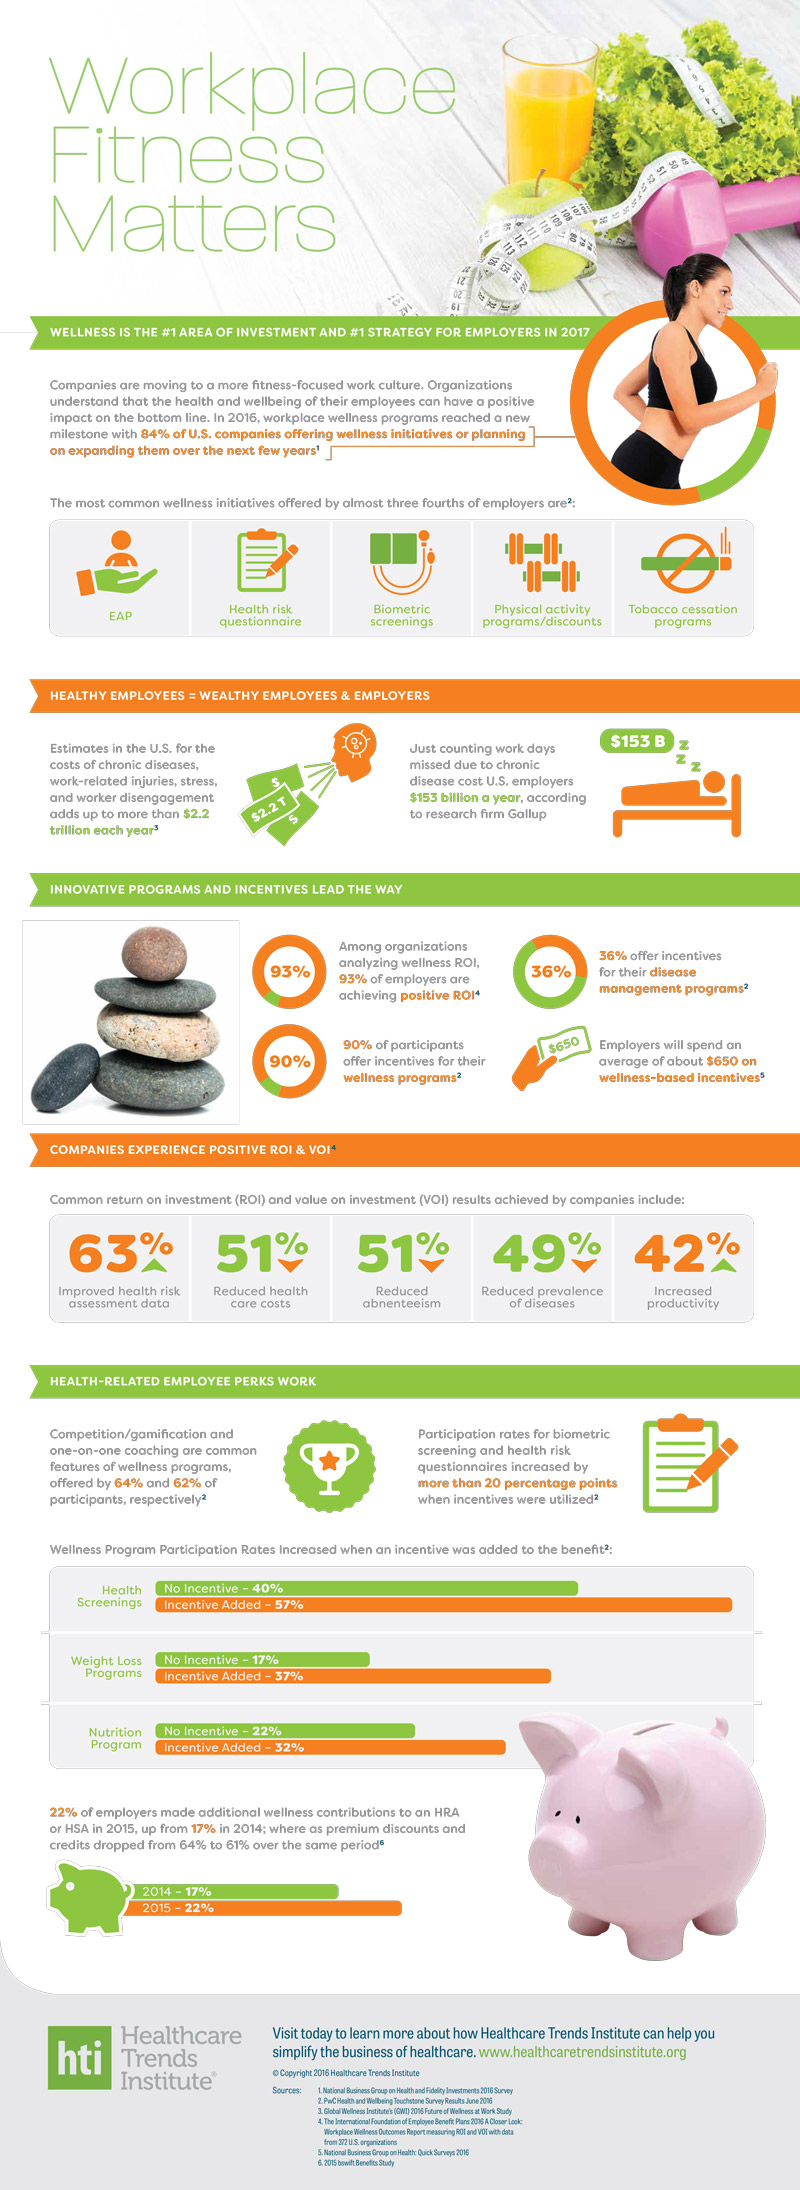 Workplace Fitness Matters - Infographic